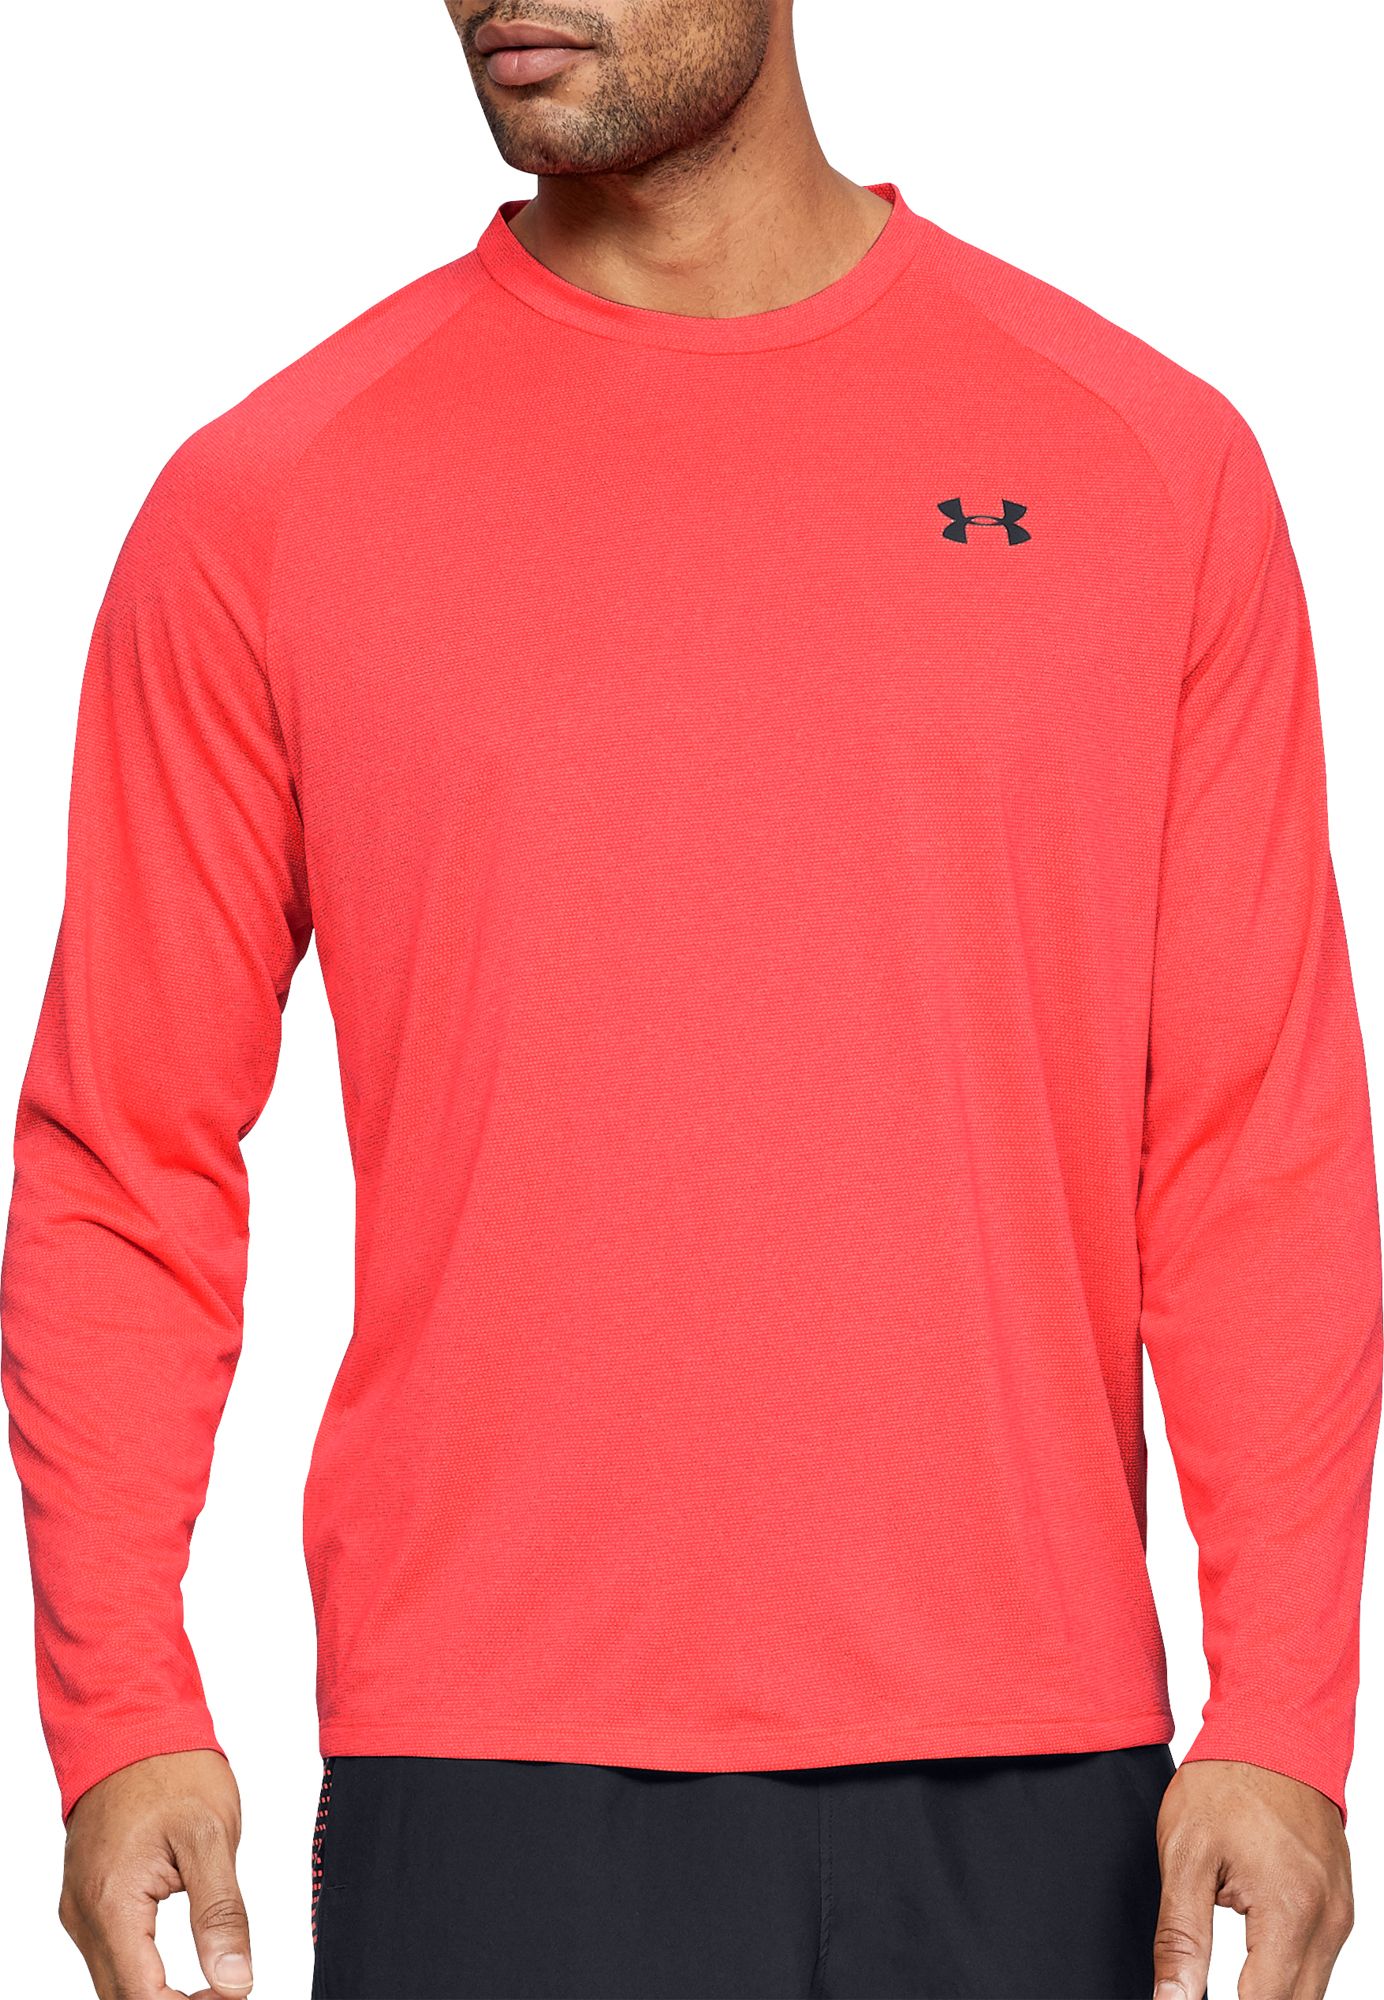 under armour red black